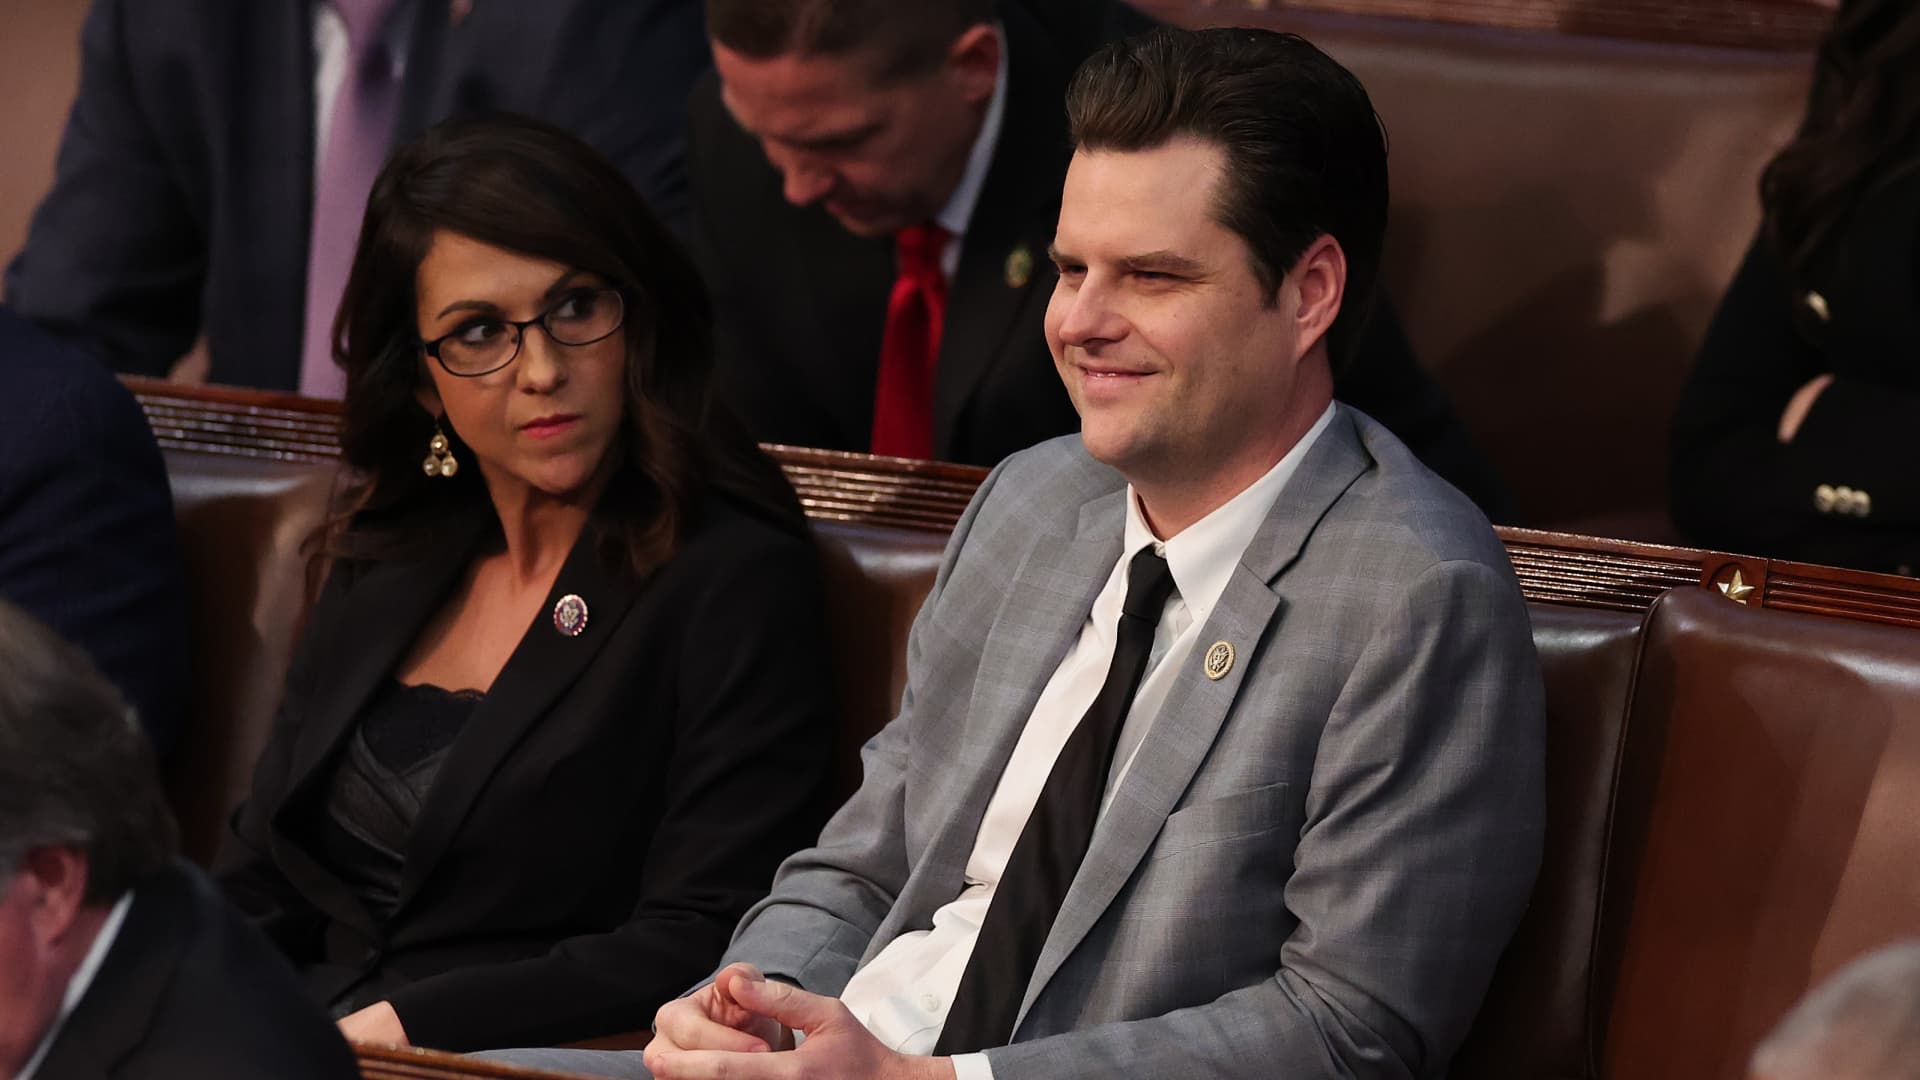 U.S. Rep.-elect Matt Gaetz (R-FL) sits next to Rep.-elect Lauren Boebert (R-CO) in the House Chamber during the fourth day of elections for Speaker of the House at the U.S. Capitol Building on January 06, 2023 in Washington, DC.